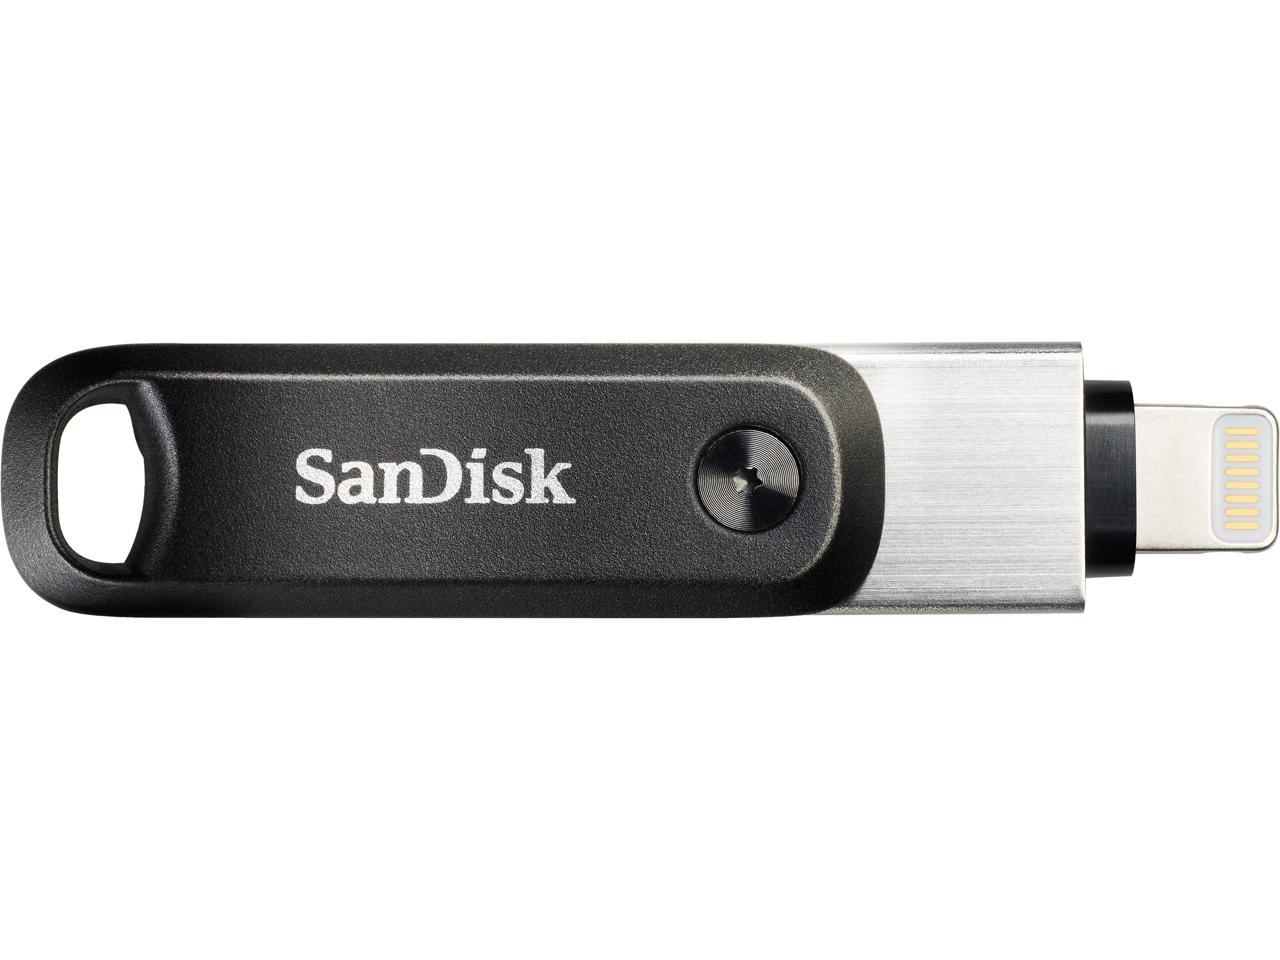 SanDisk 128GB iXpand Flash Drive Go for Your iPhone - Newegg.com